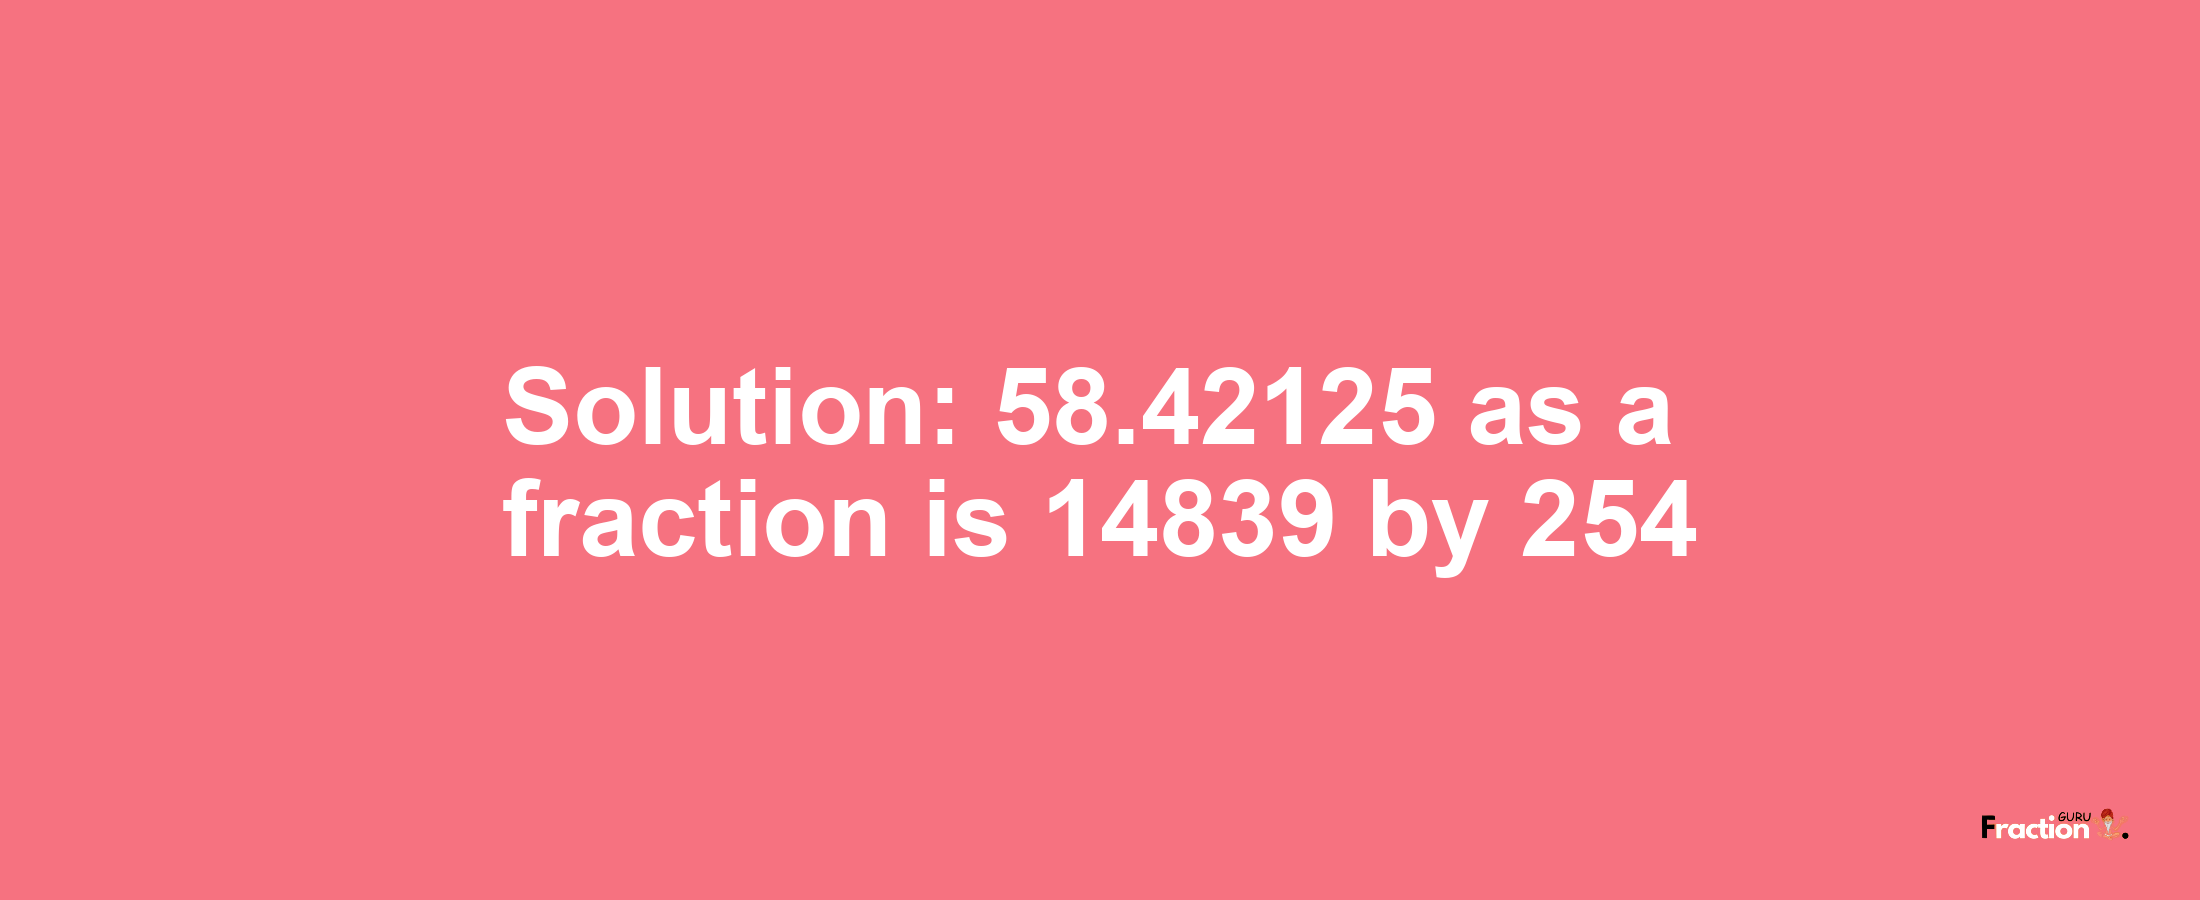 Solution:58.42125 as a fraction is 14839/254